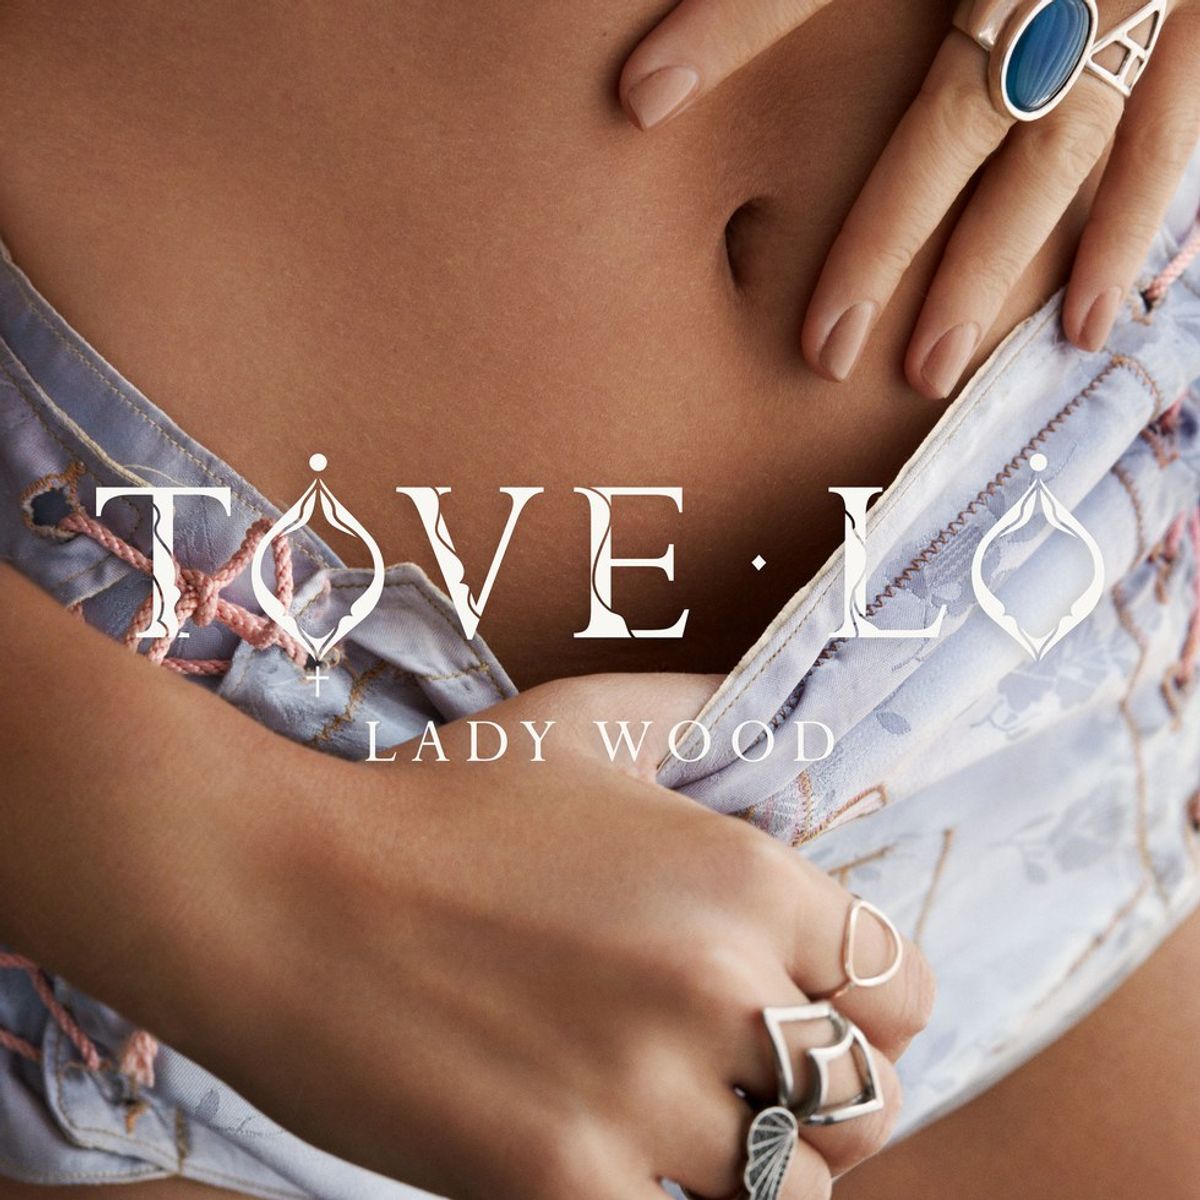 Why I Love Tove Lo and Why You Must Listen to Her New Album "Lady Wood"